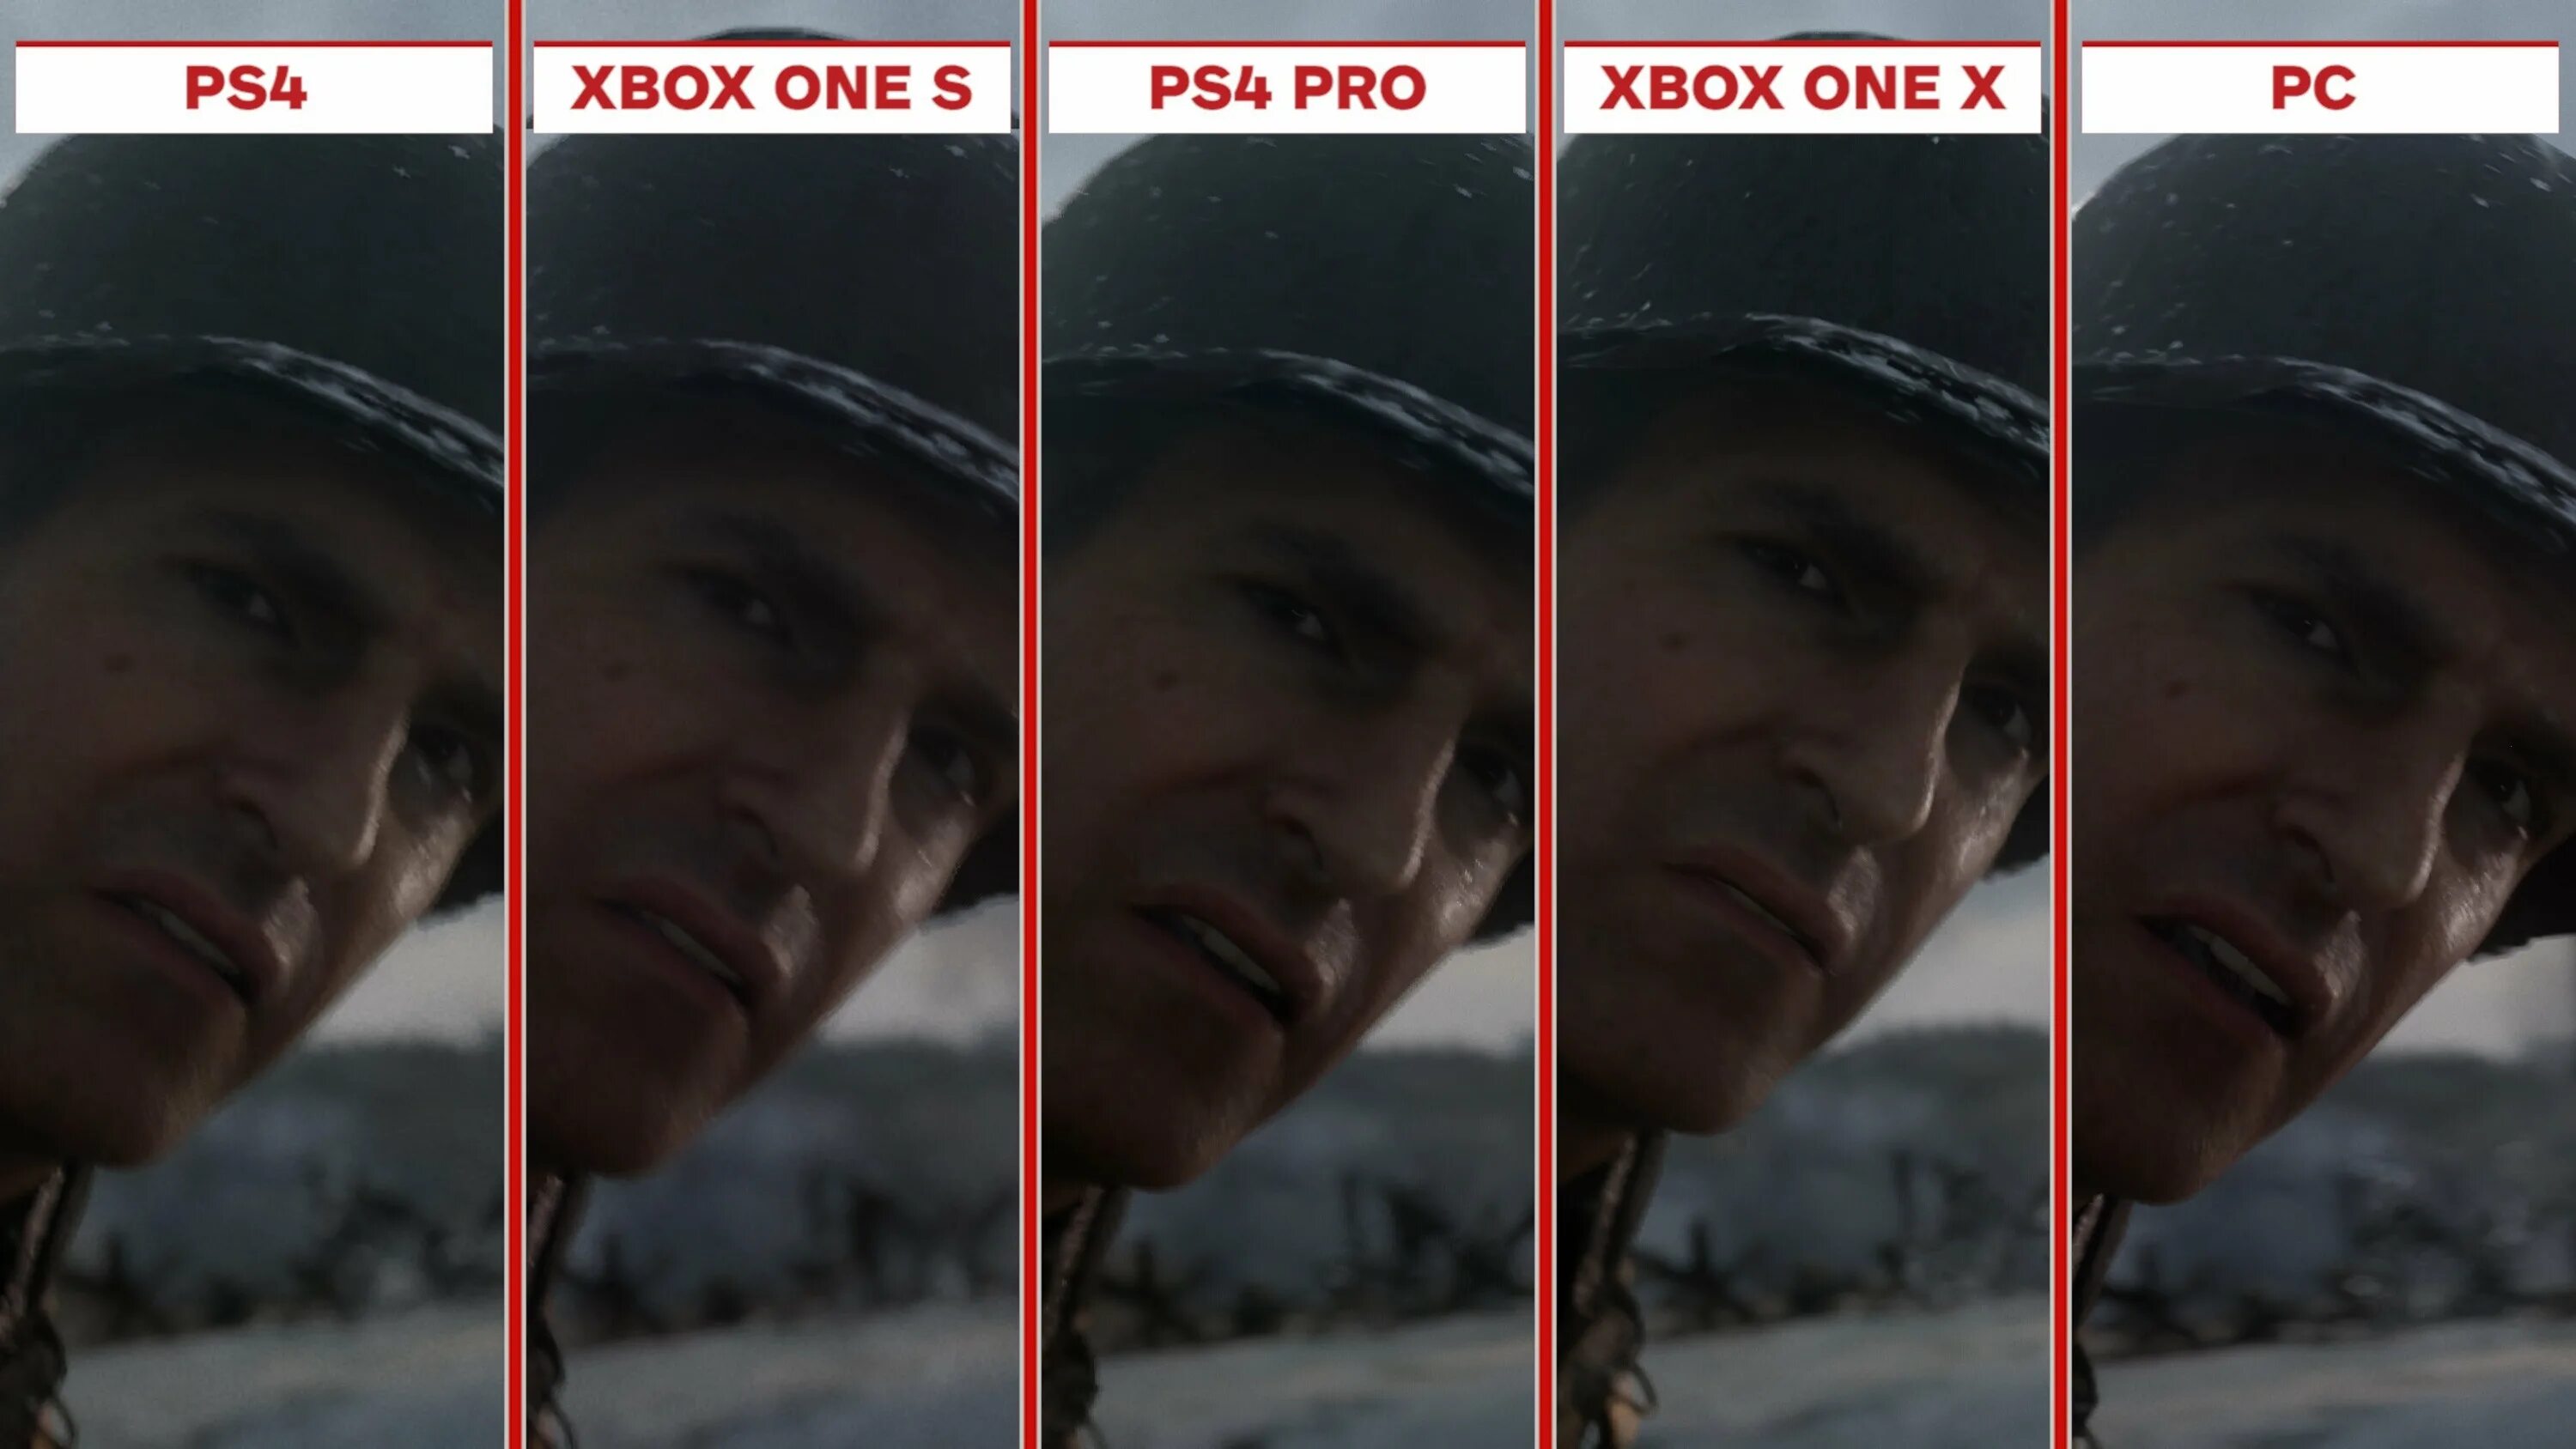 One vs one s. Call Duty ww2 на PLAYSTATION. Xbox one vs Xbox one s сравнение графики. Xbox one s vs ps4. PLAYSTATION 4 Pro vs Xbox one x.